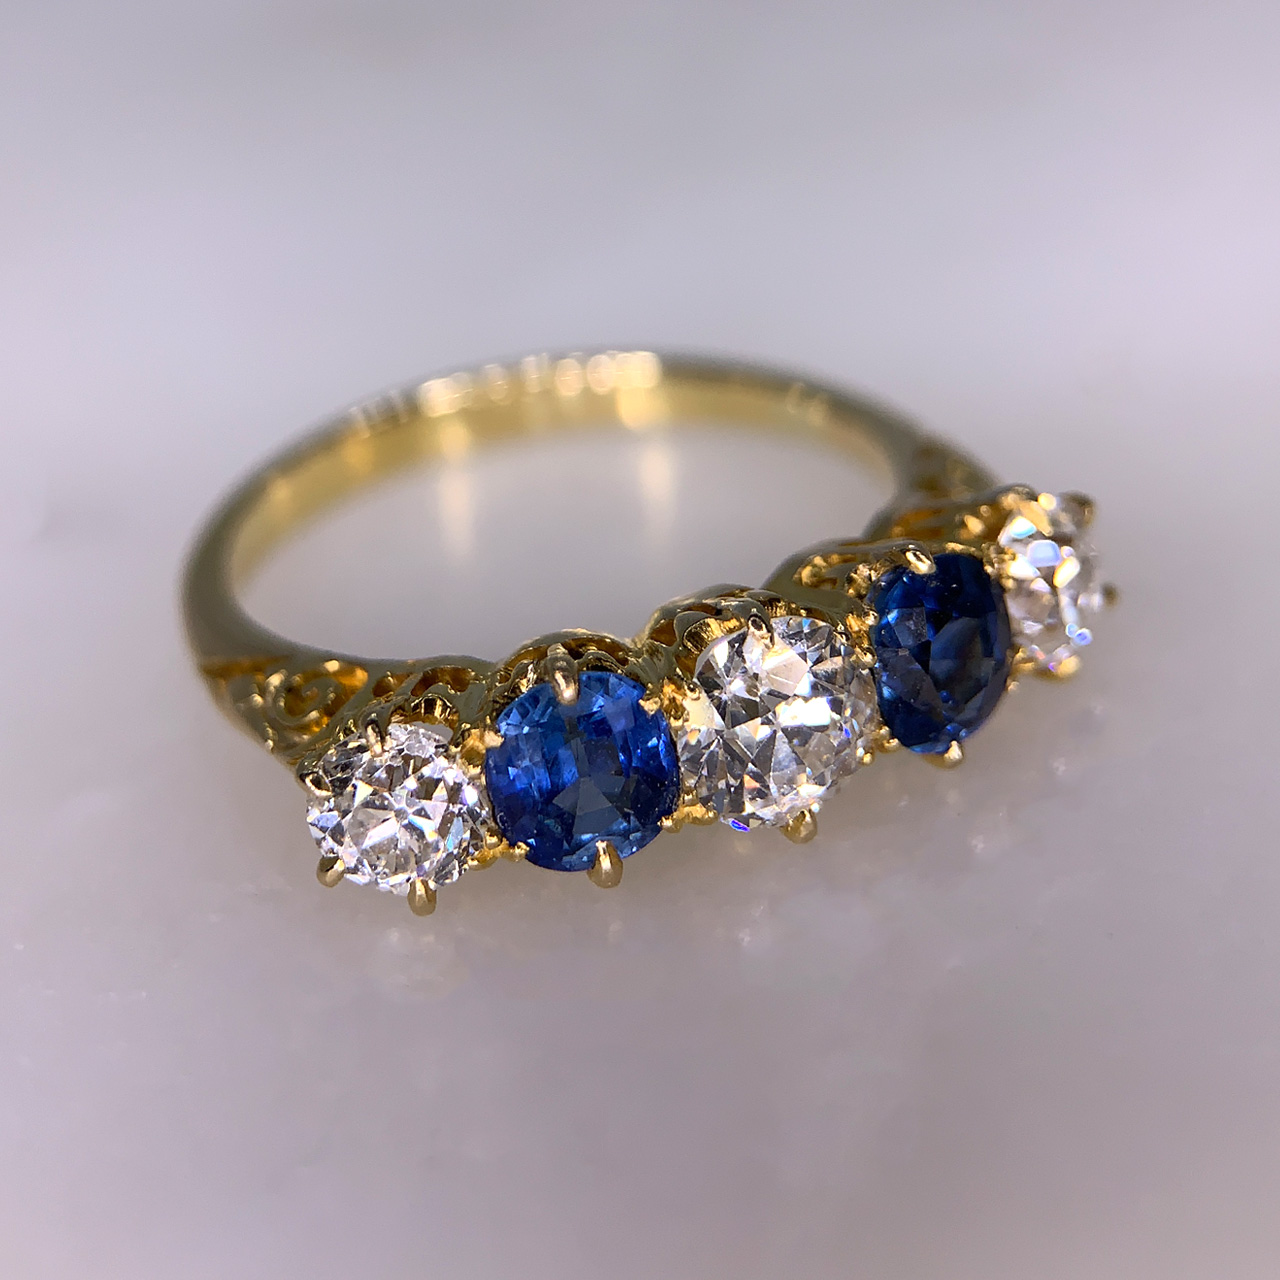 Edwardian Sapphire and Diamond Half Hoop Ring in 18ct Gold tested. This exquisite multi-tone Sapphire and brilliant cut Diamond 5 stone half hoop holds a total of 1 carat of Sapphire and 1.6 carat total diamond weight. All stones are claw set. The head of the ring is approximately 21mm x 6mm and sits within a carved shoulder shank in the most perfect condition.